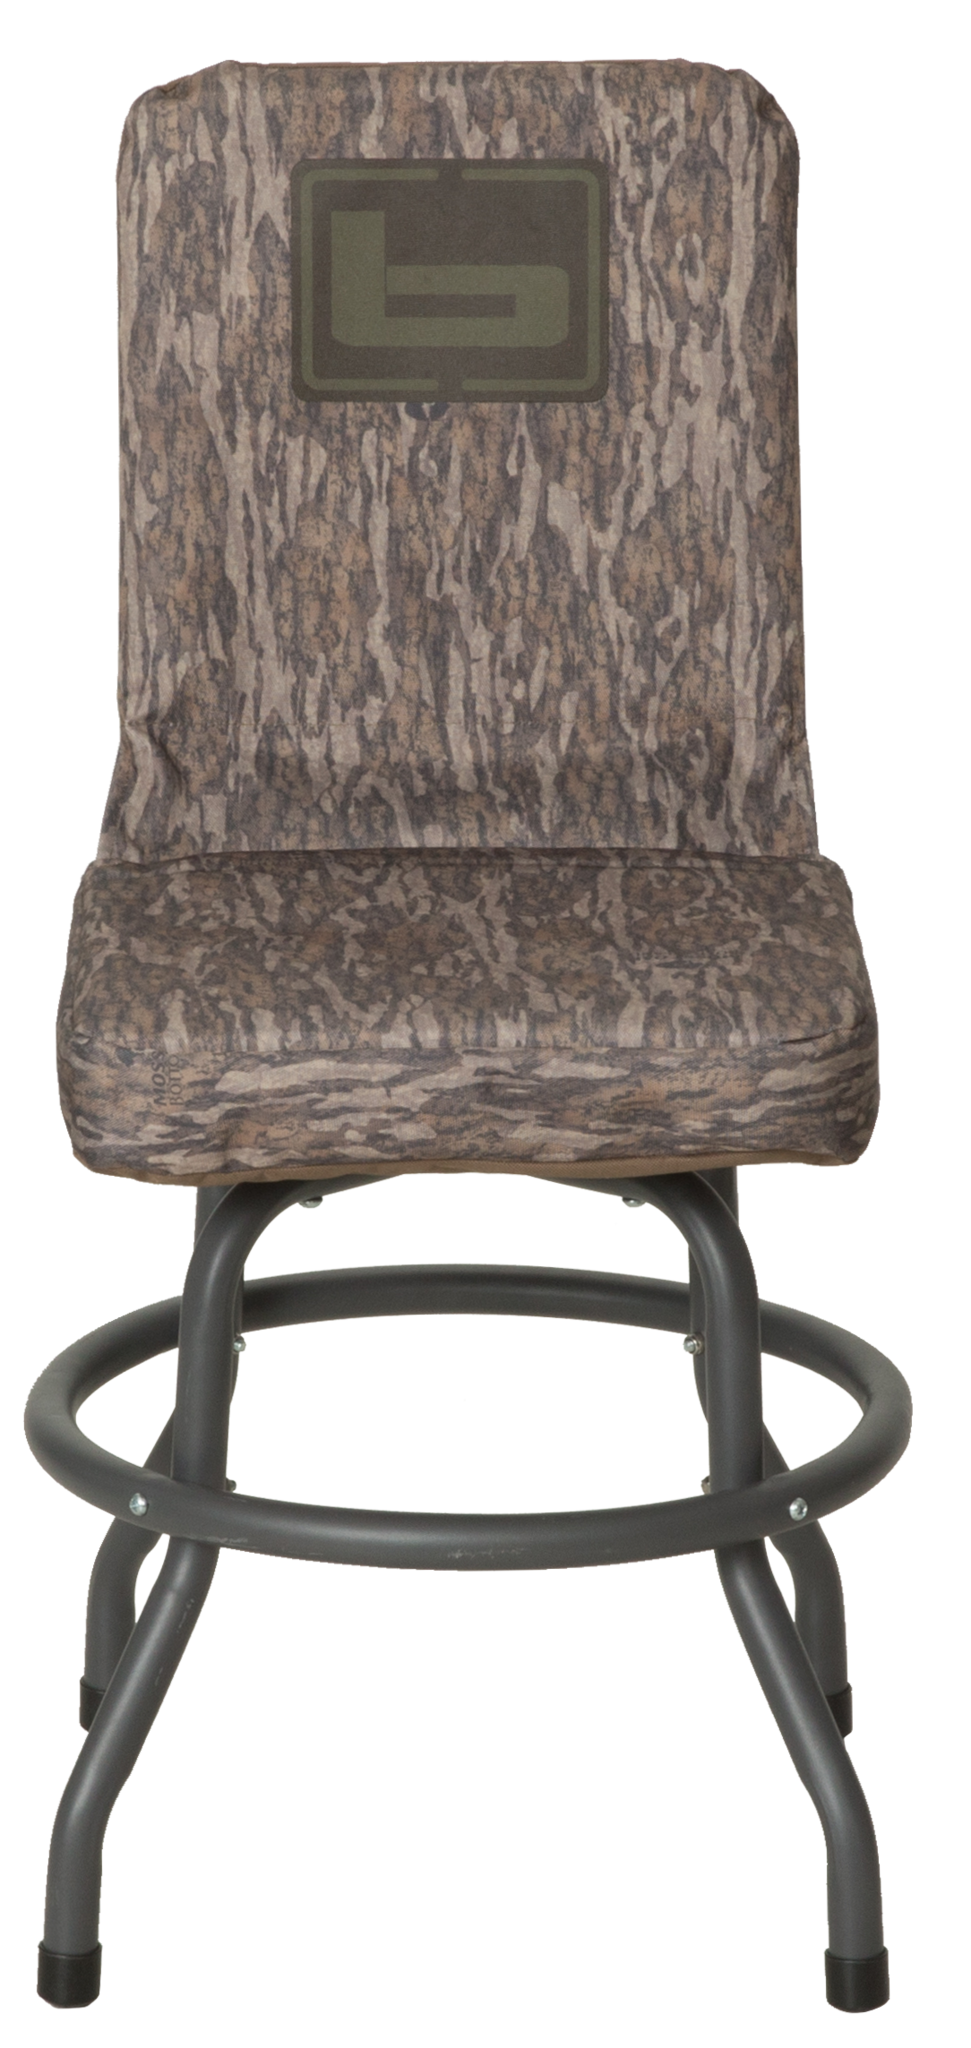 Banded Hi-Top Blind Chair, Tall - Men's